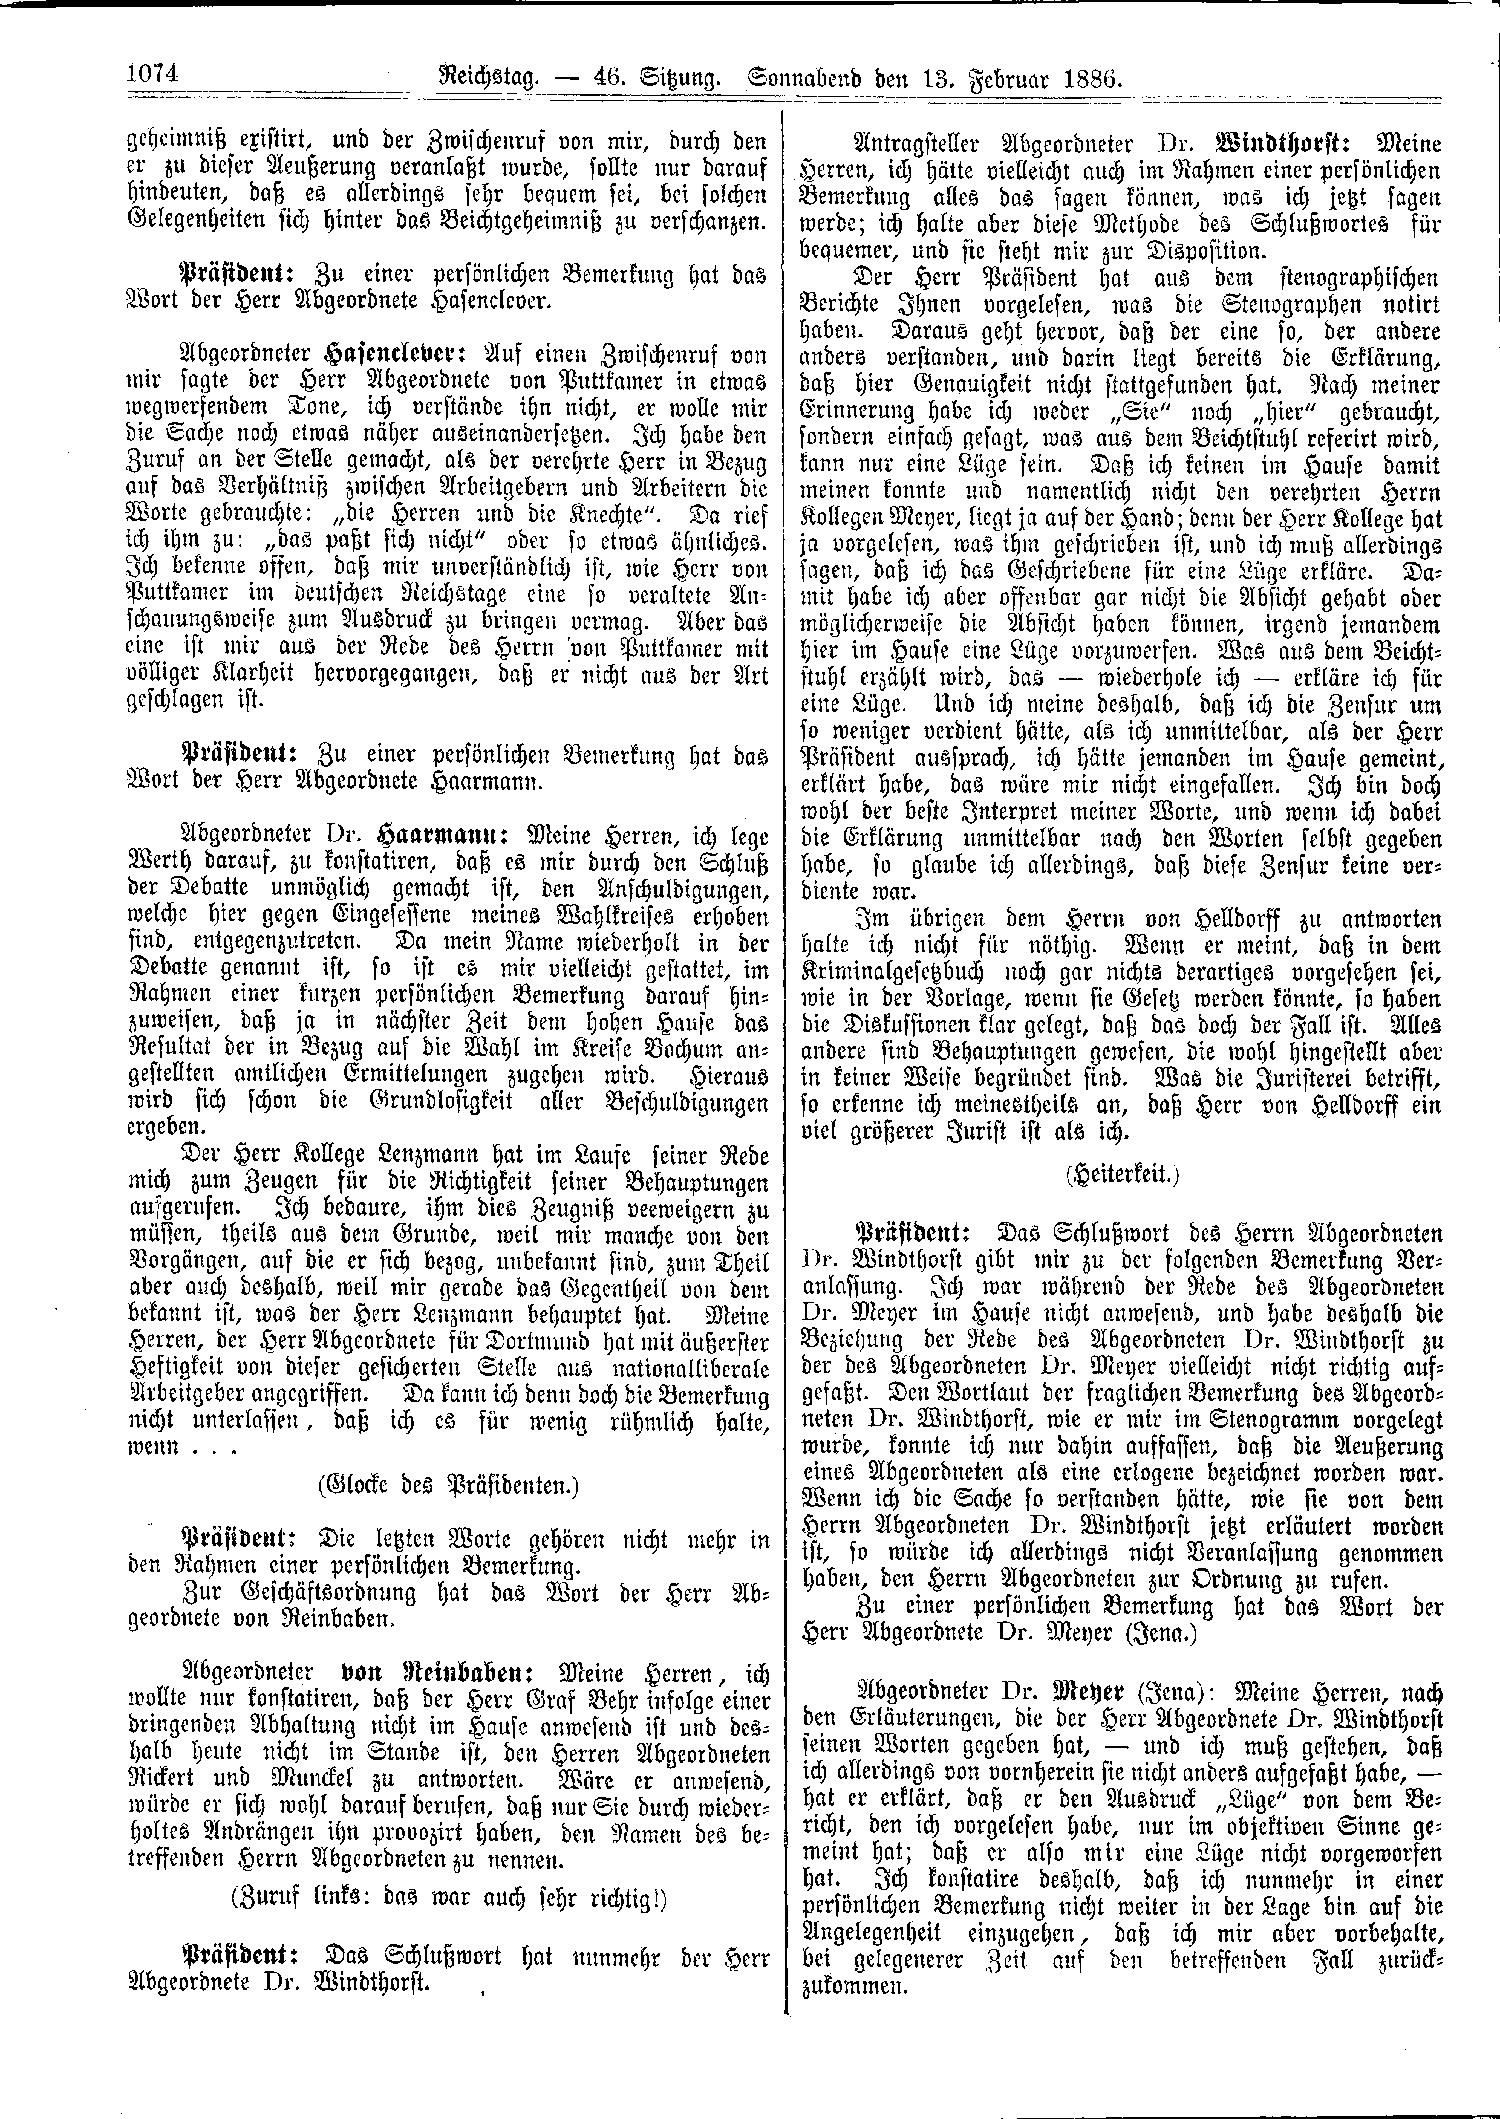 Scan of page 1074